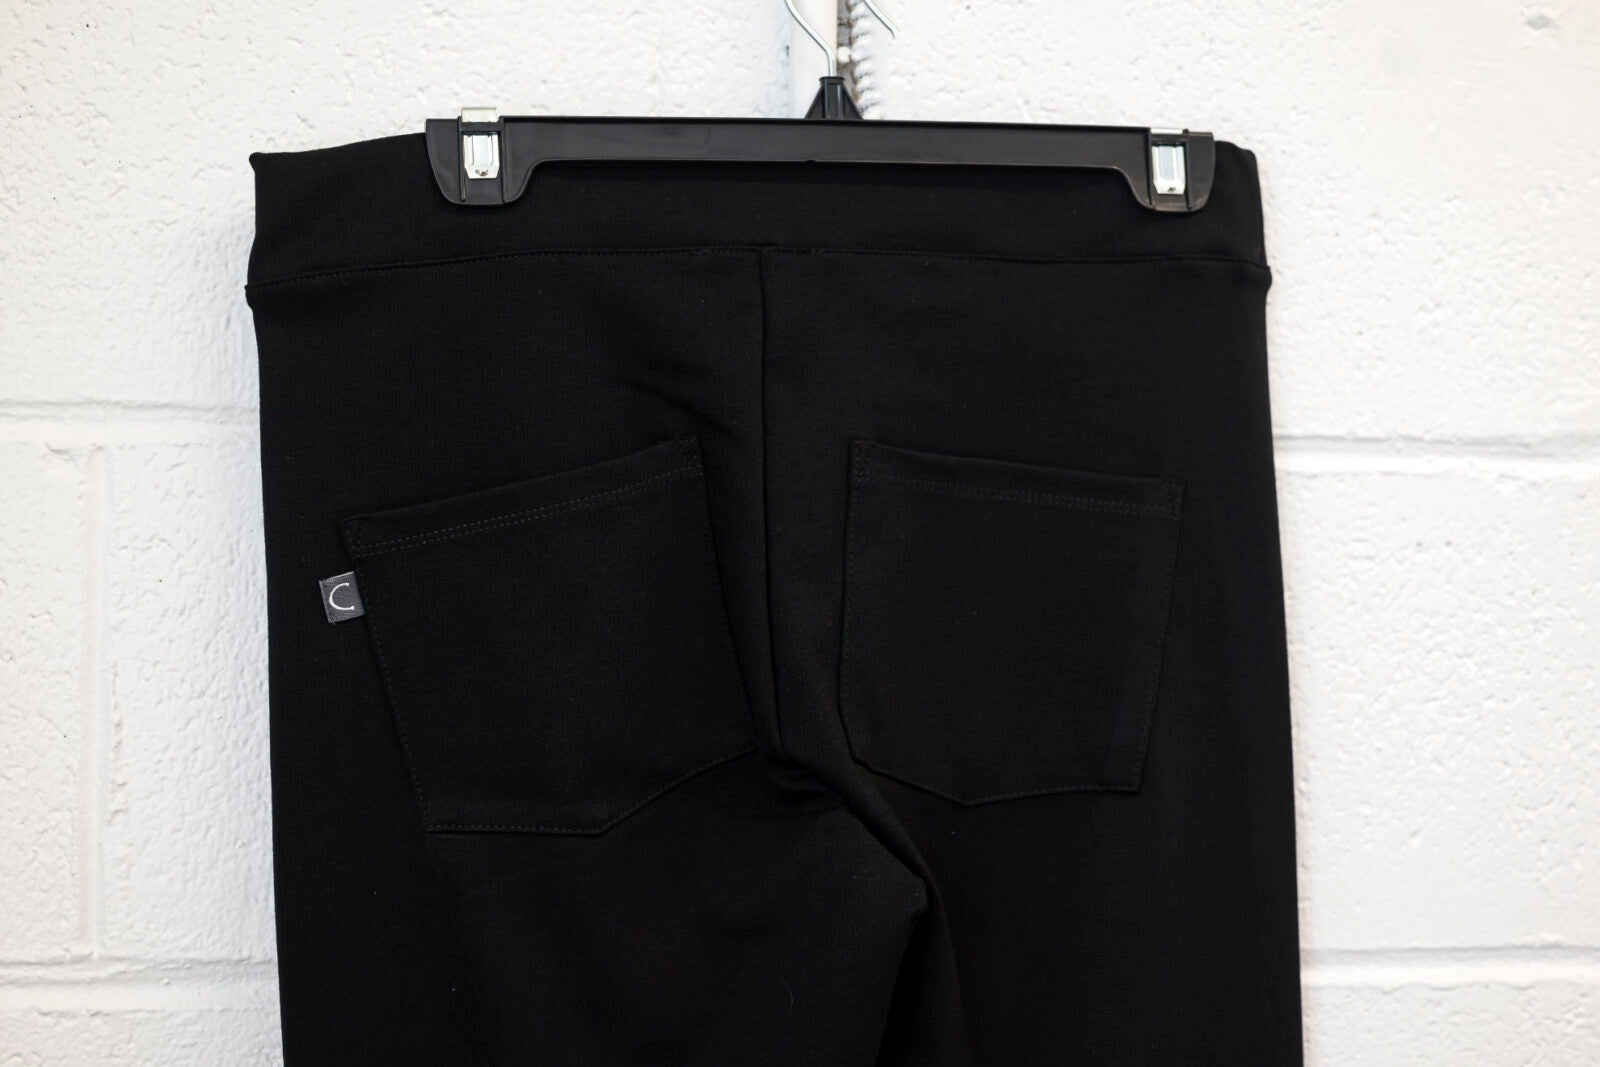 Delice Pants by Marie C, Black, pull-on, slim fit, Ponte di Roma fabric, rear pockets, sizes XS to XL, made in Quebec